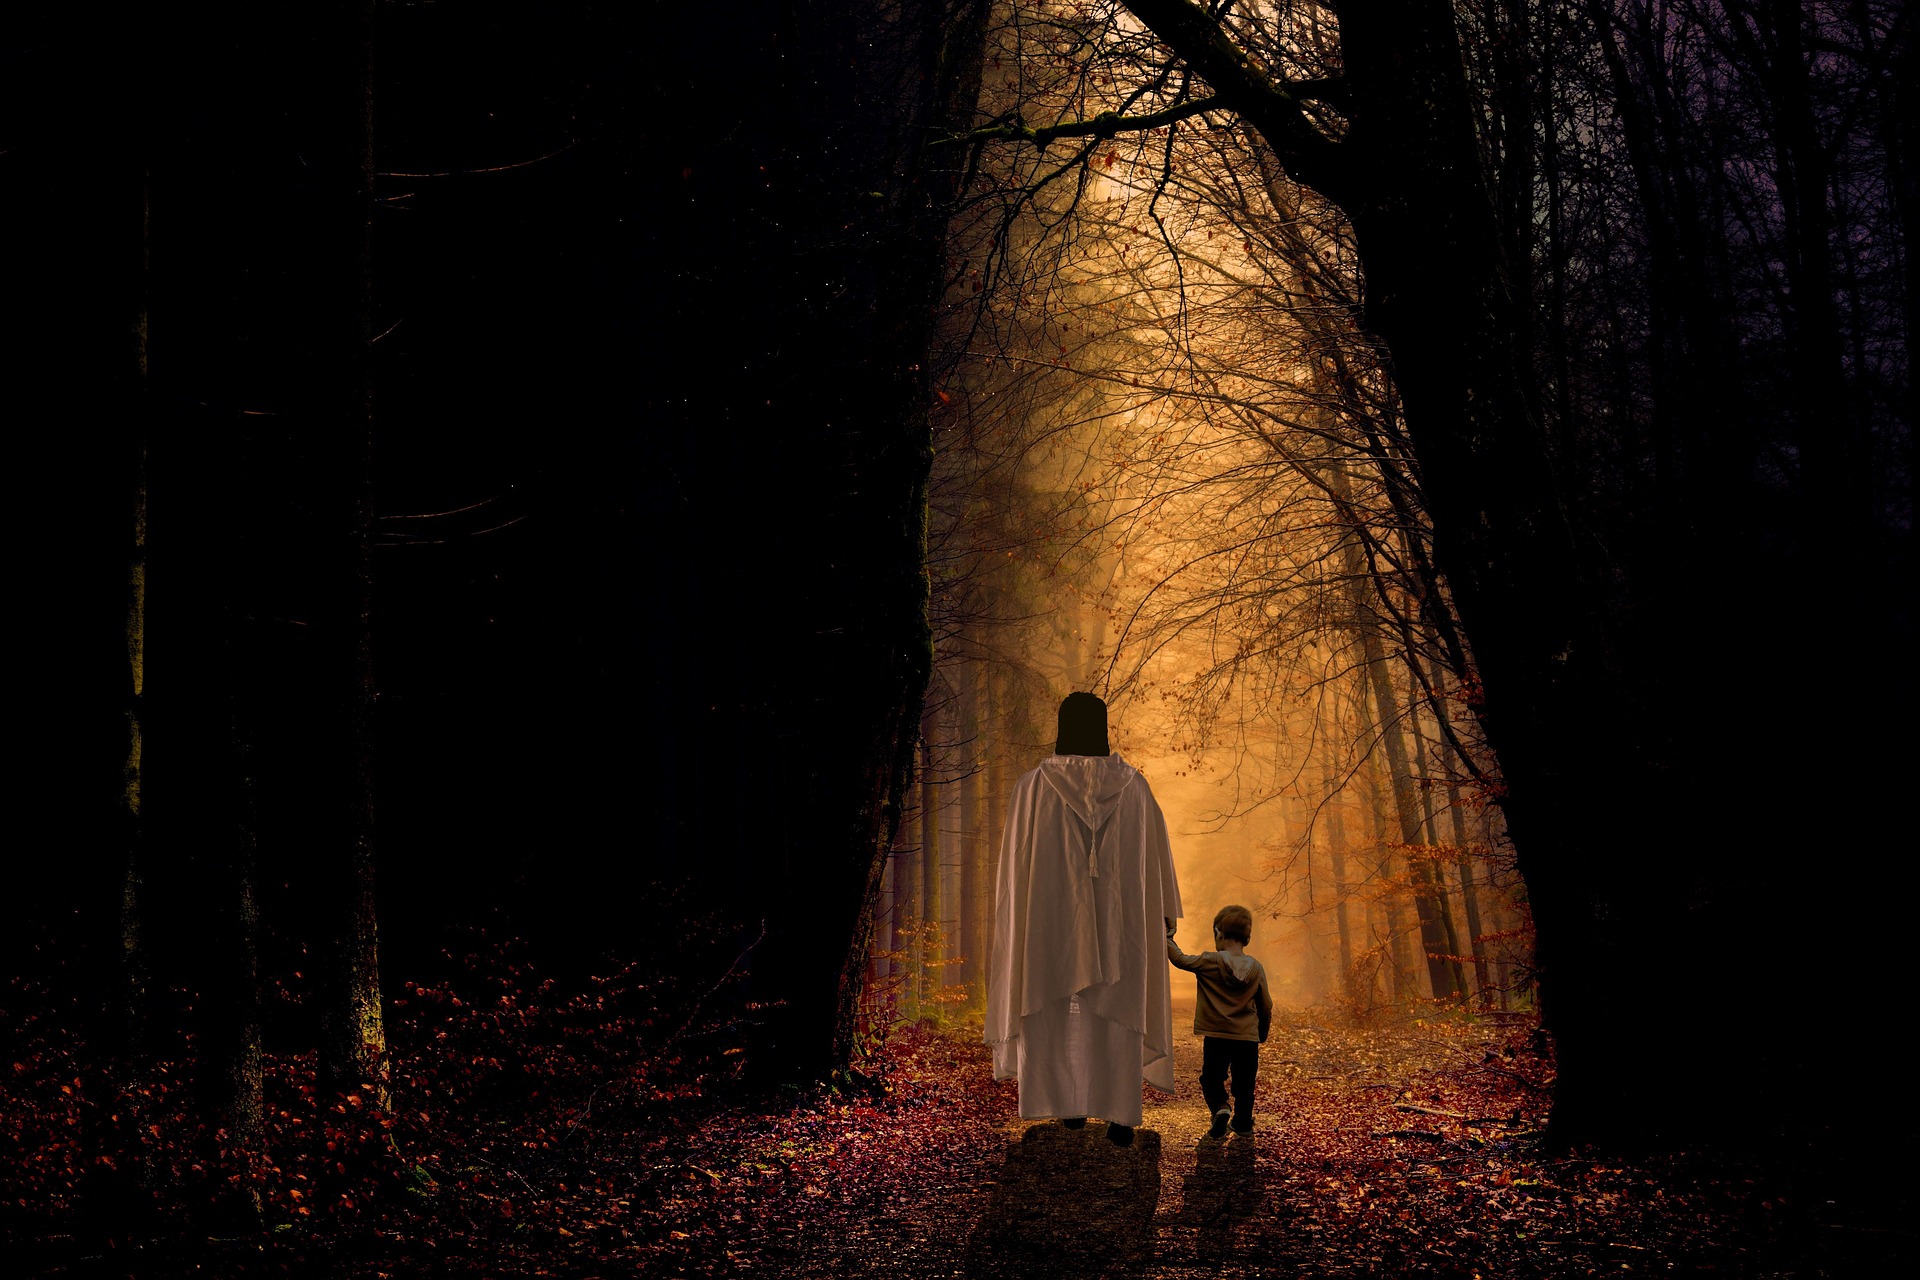 Jesus walking with a child in a forest.